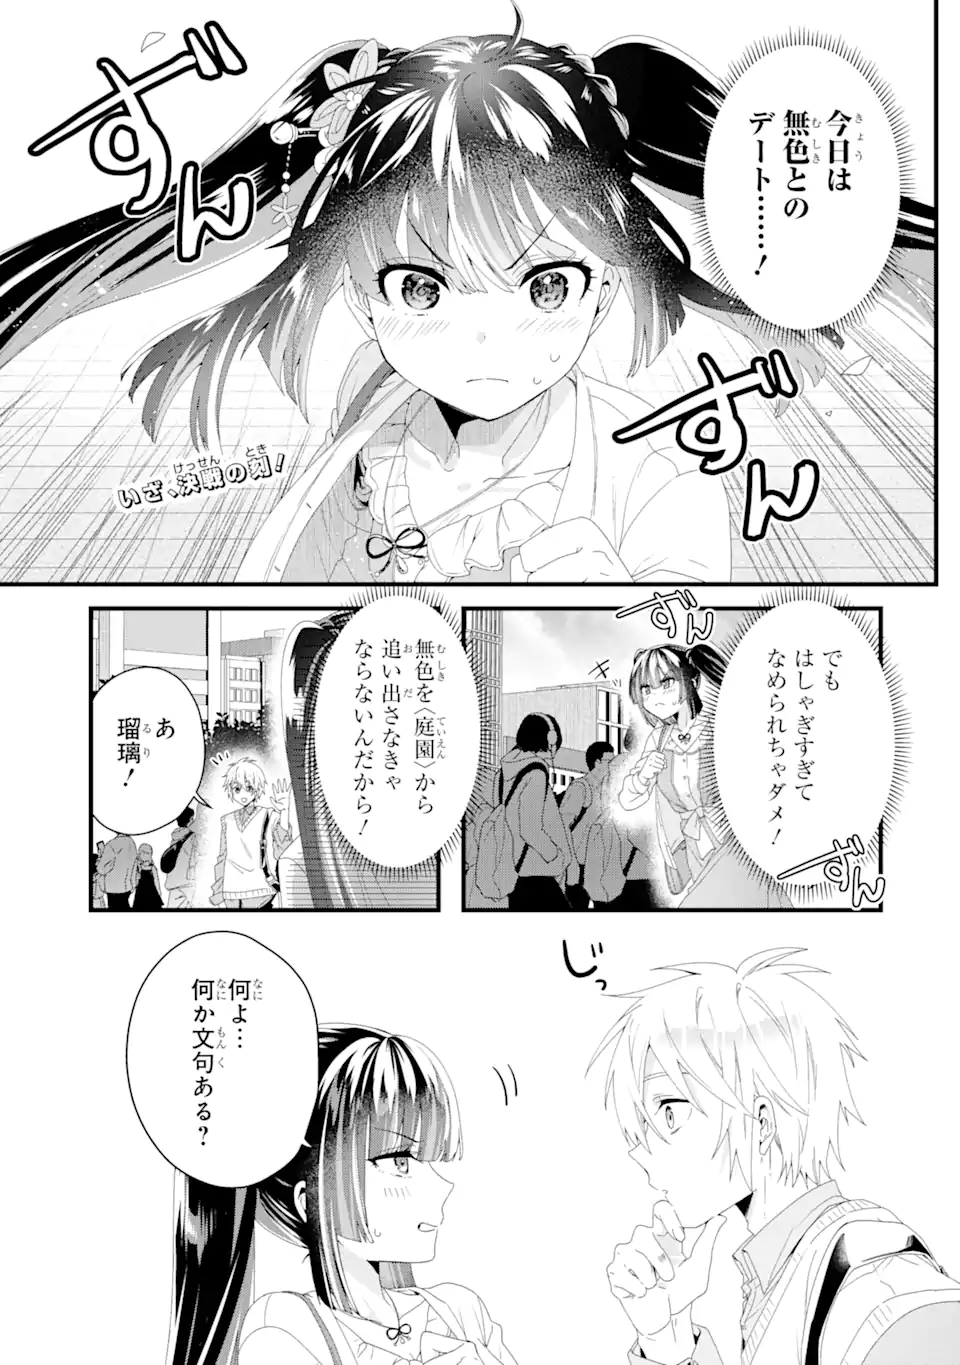 Ousama no Propose - Chapter 10.1 - Page 1